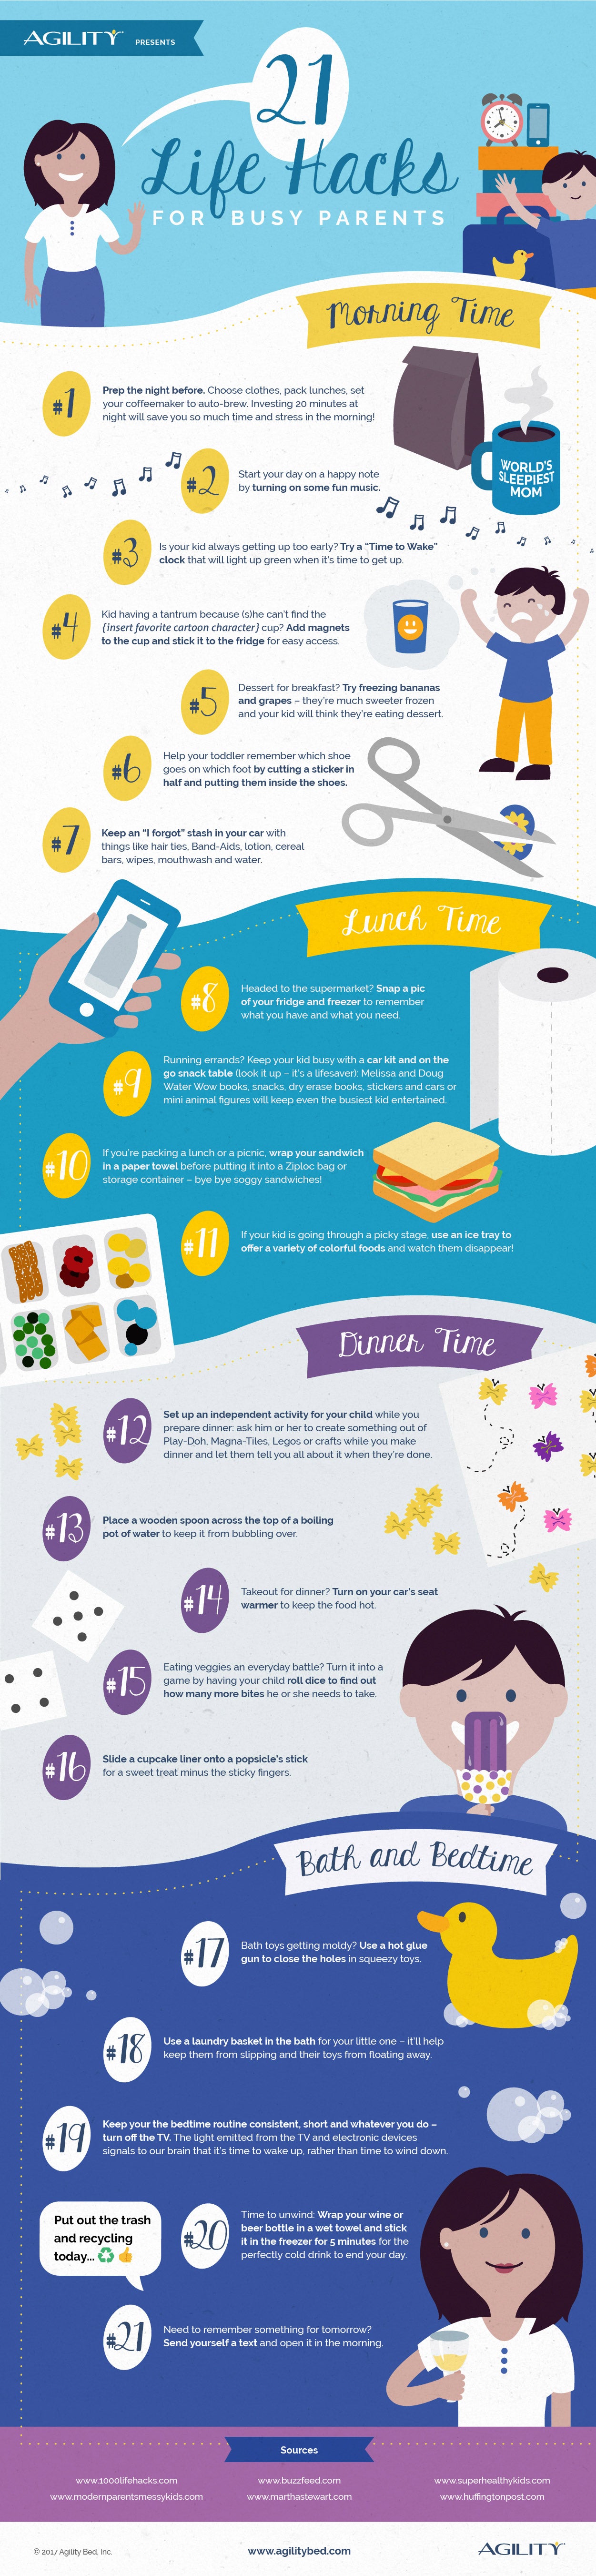 Infographic: 21 Life Hacks for Busy Parents